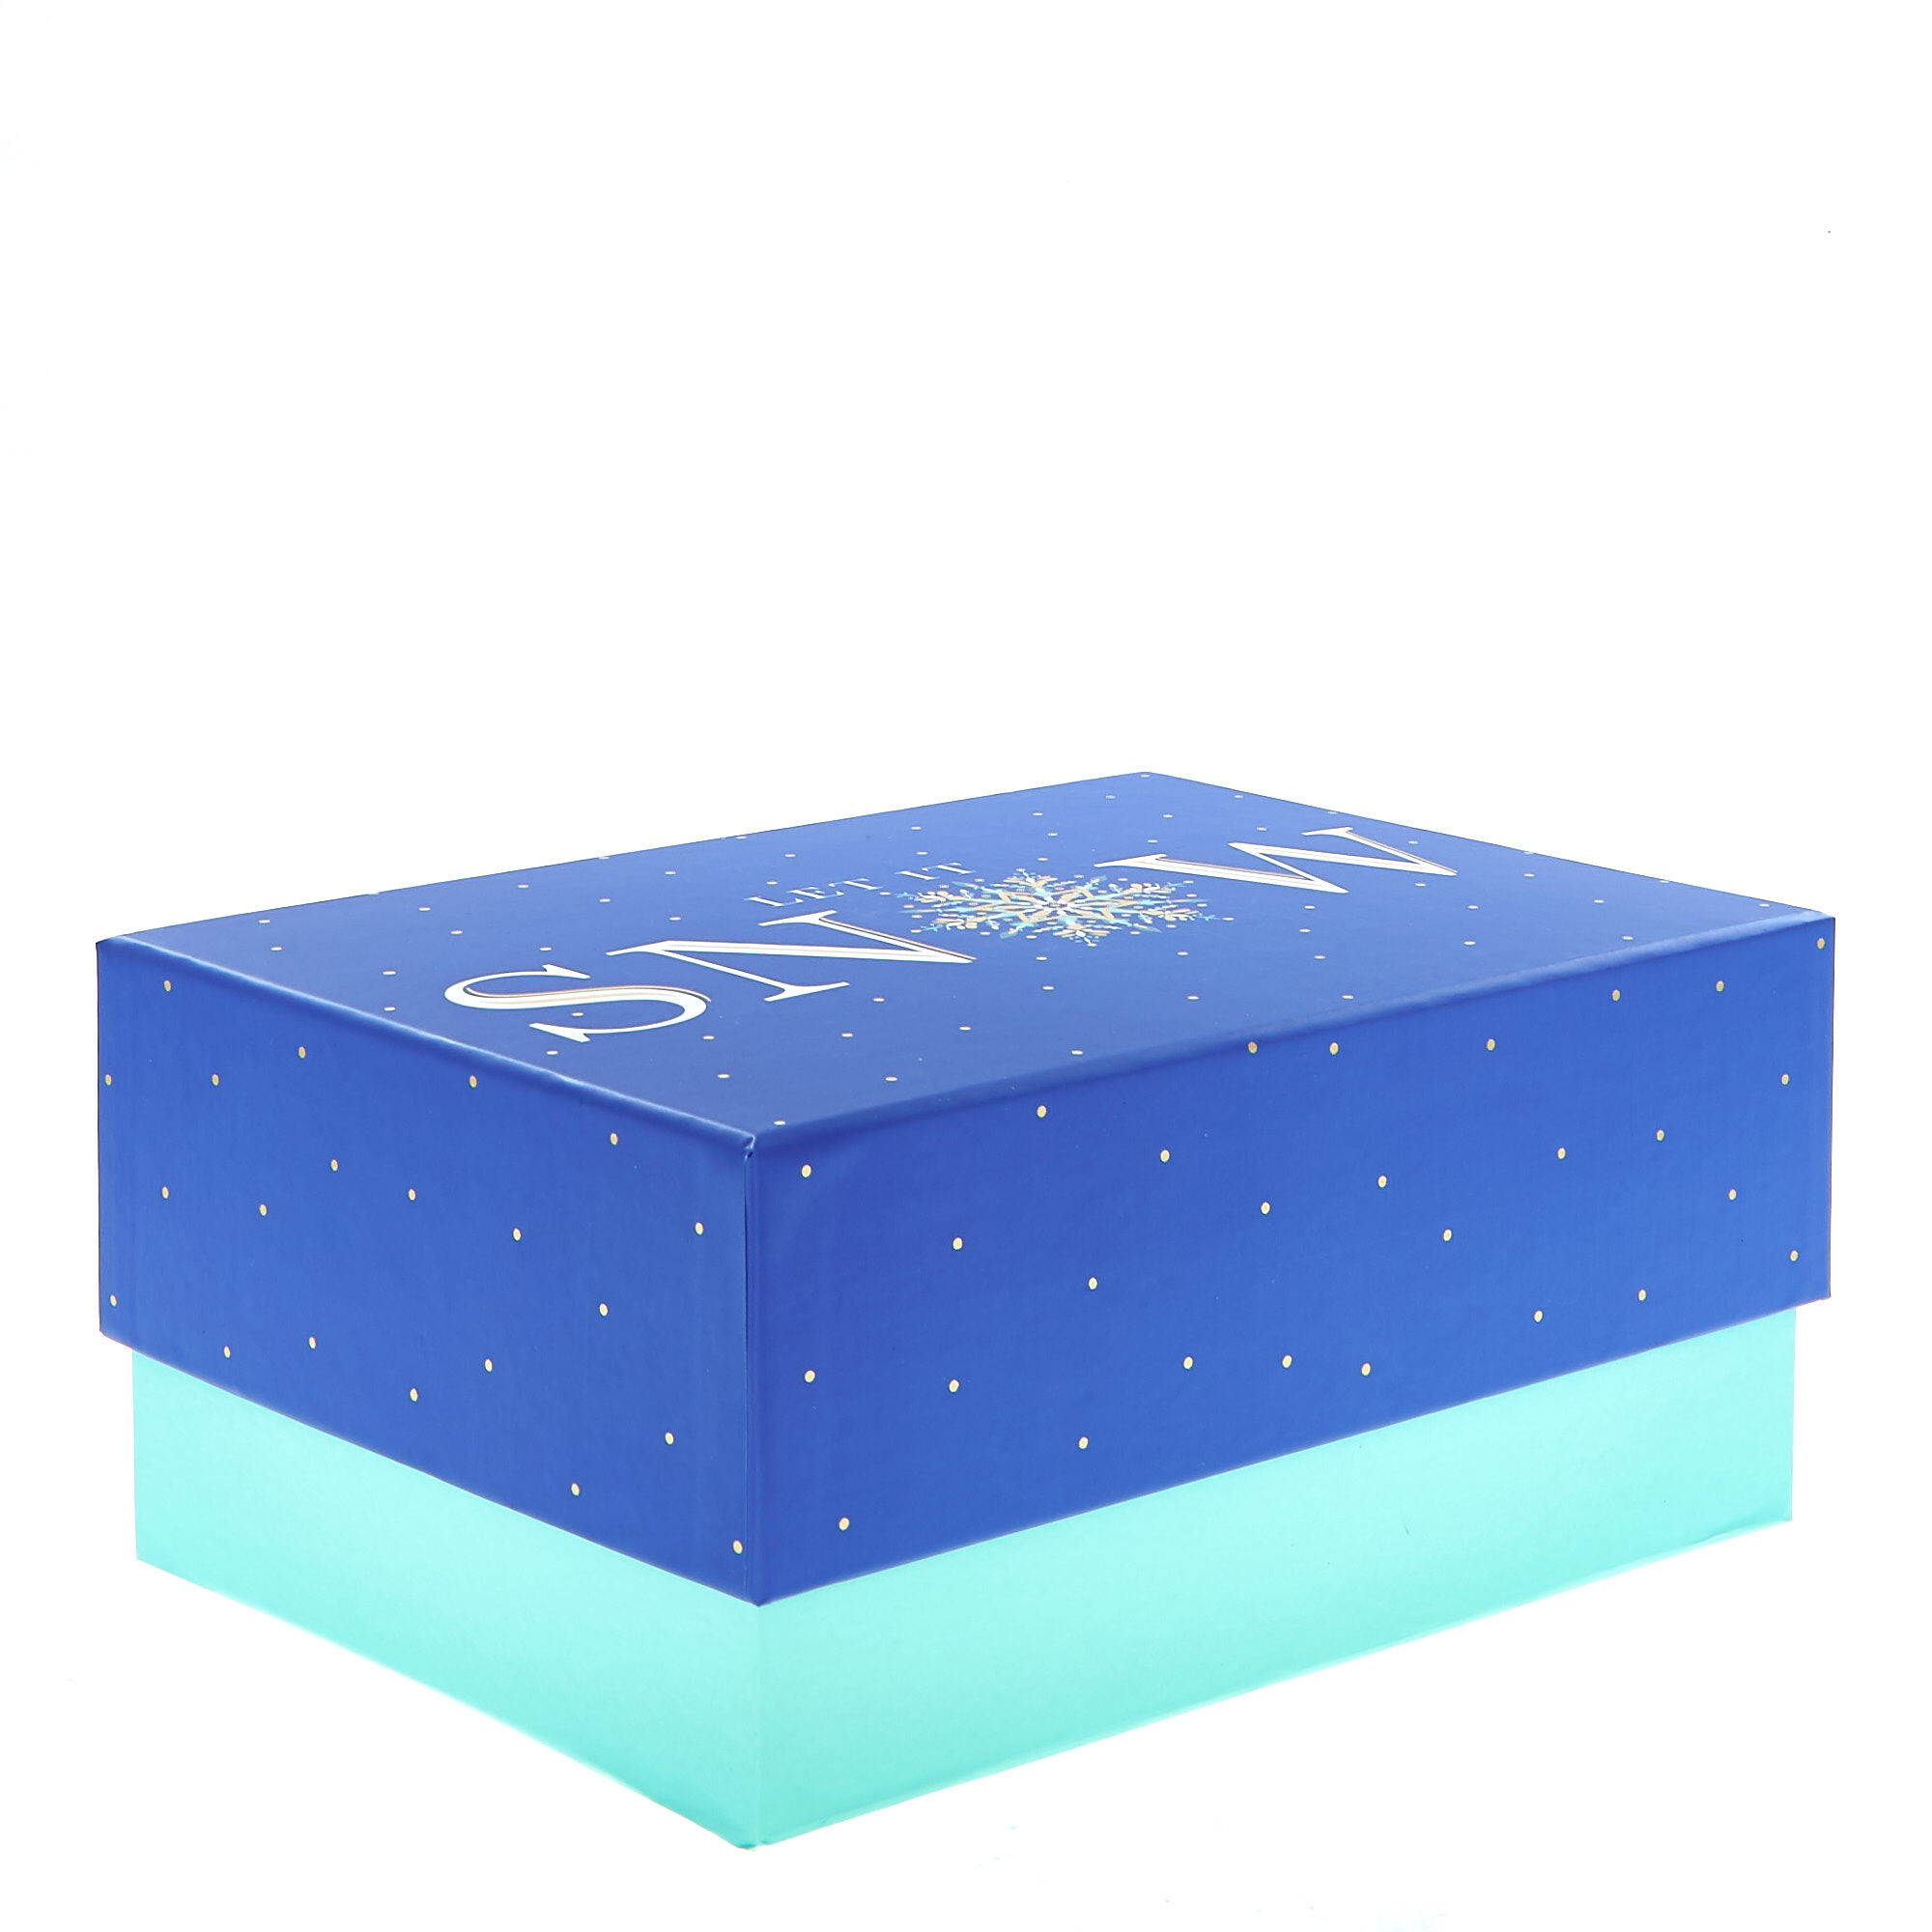 Buy Christmas Eve Gift Box for GBP 2.99 | Card Factory UK